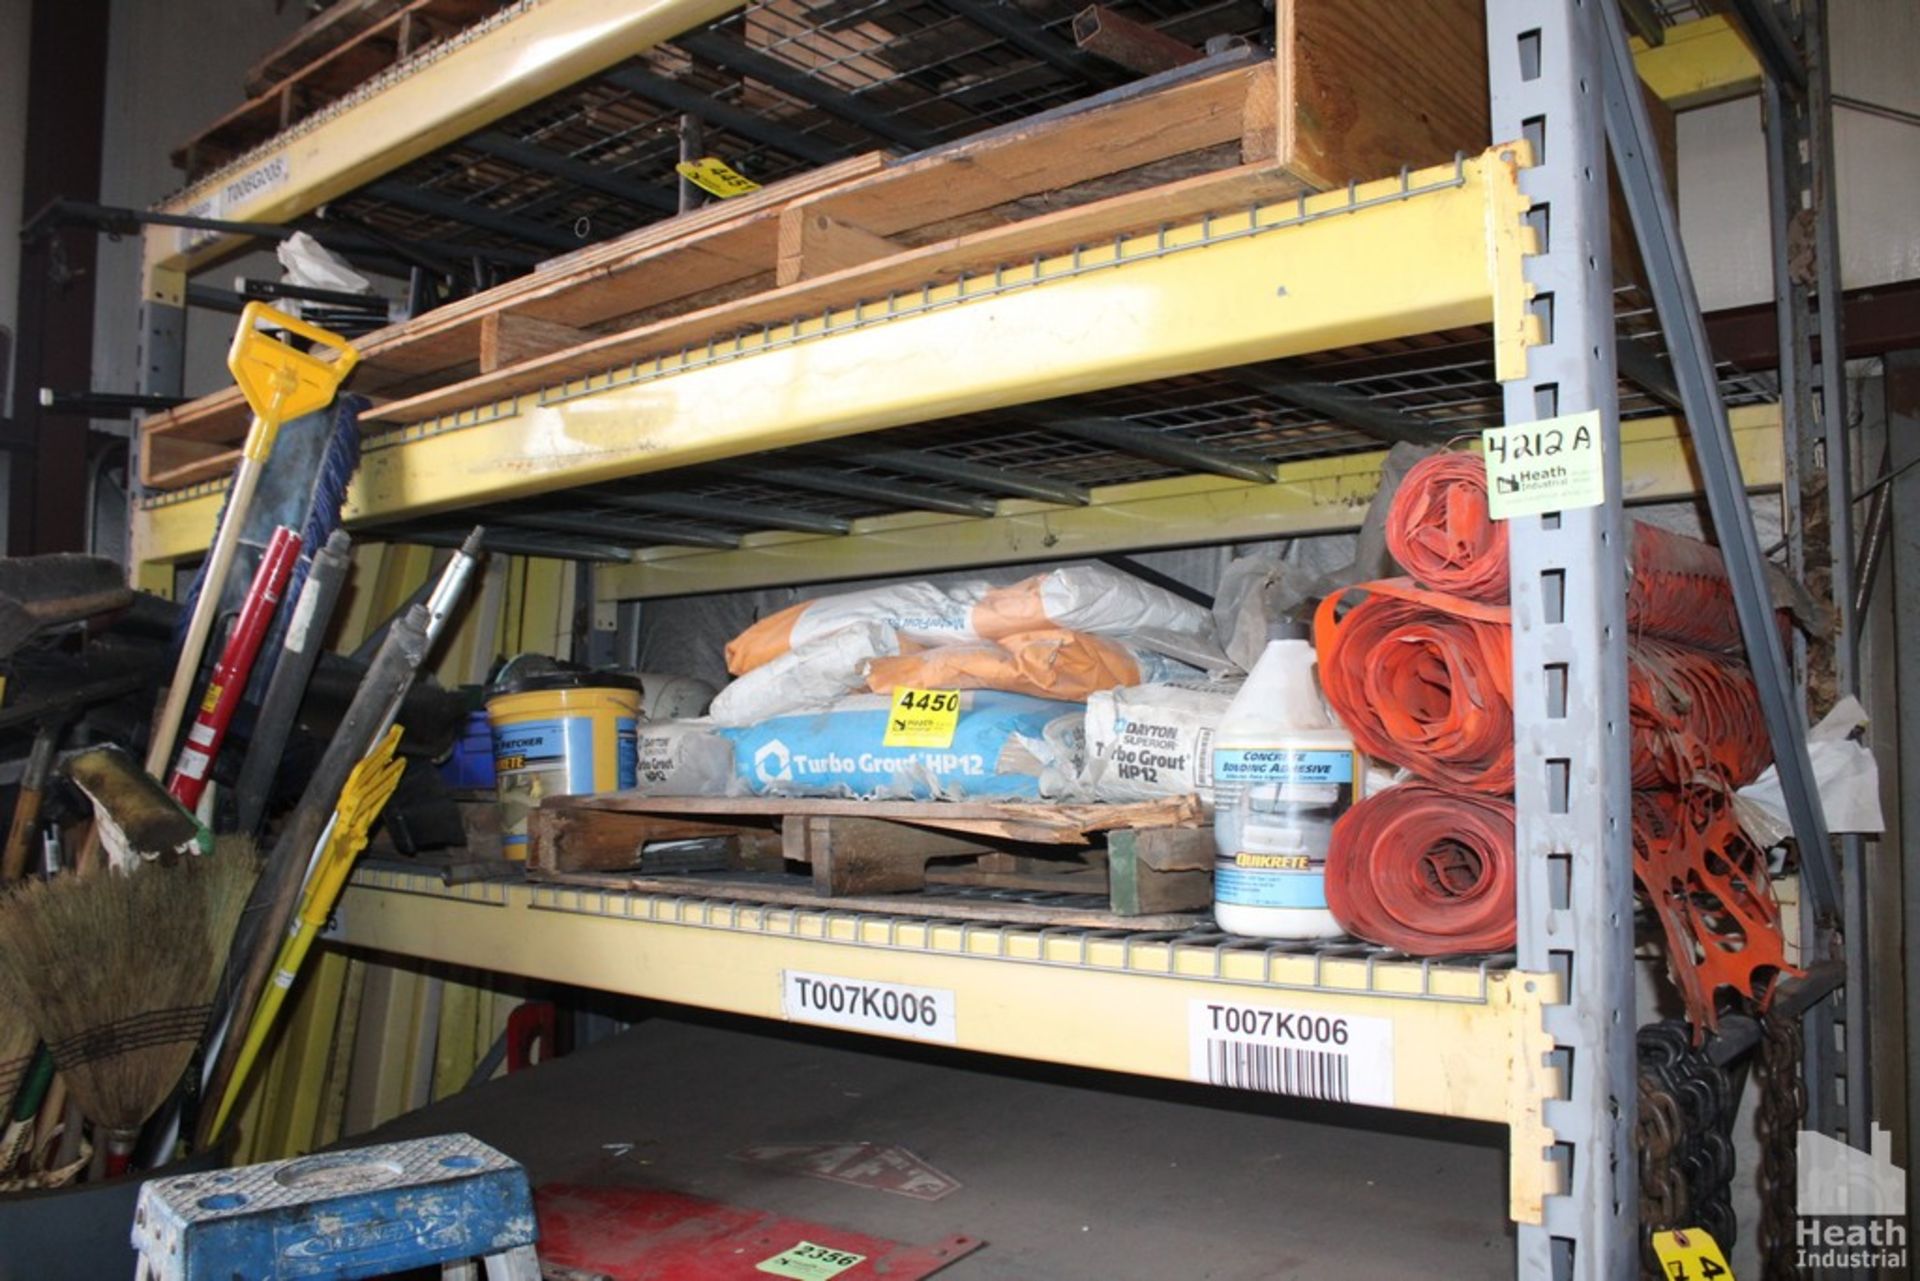 CONTENTS ON SHELF INCLUDING GROUT, SNOW FENCE AND ELECTRIC MOTORS